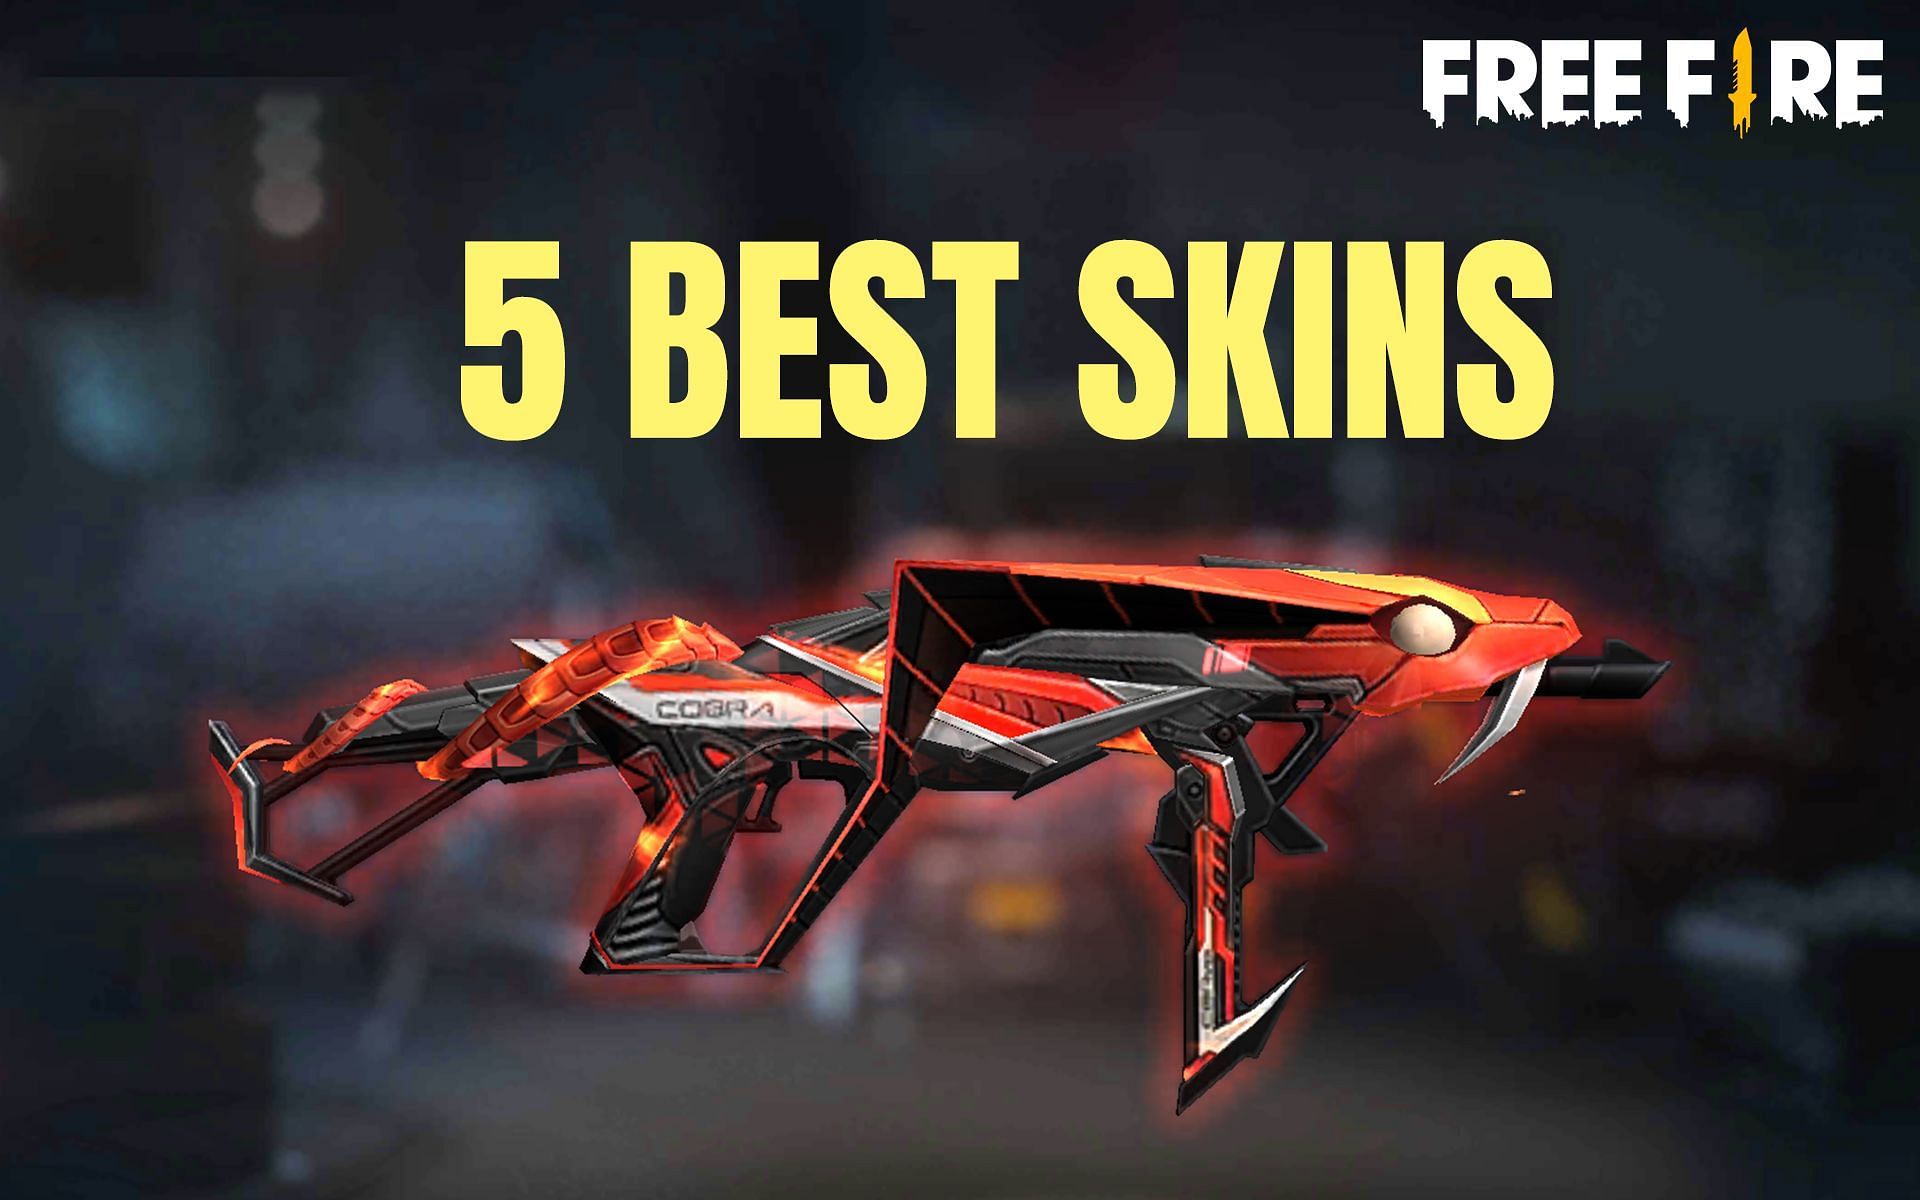 Skins have become a significant part of Free Fire&rsquo;s gameplay (Image via Sportskeeda)